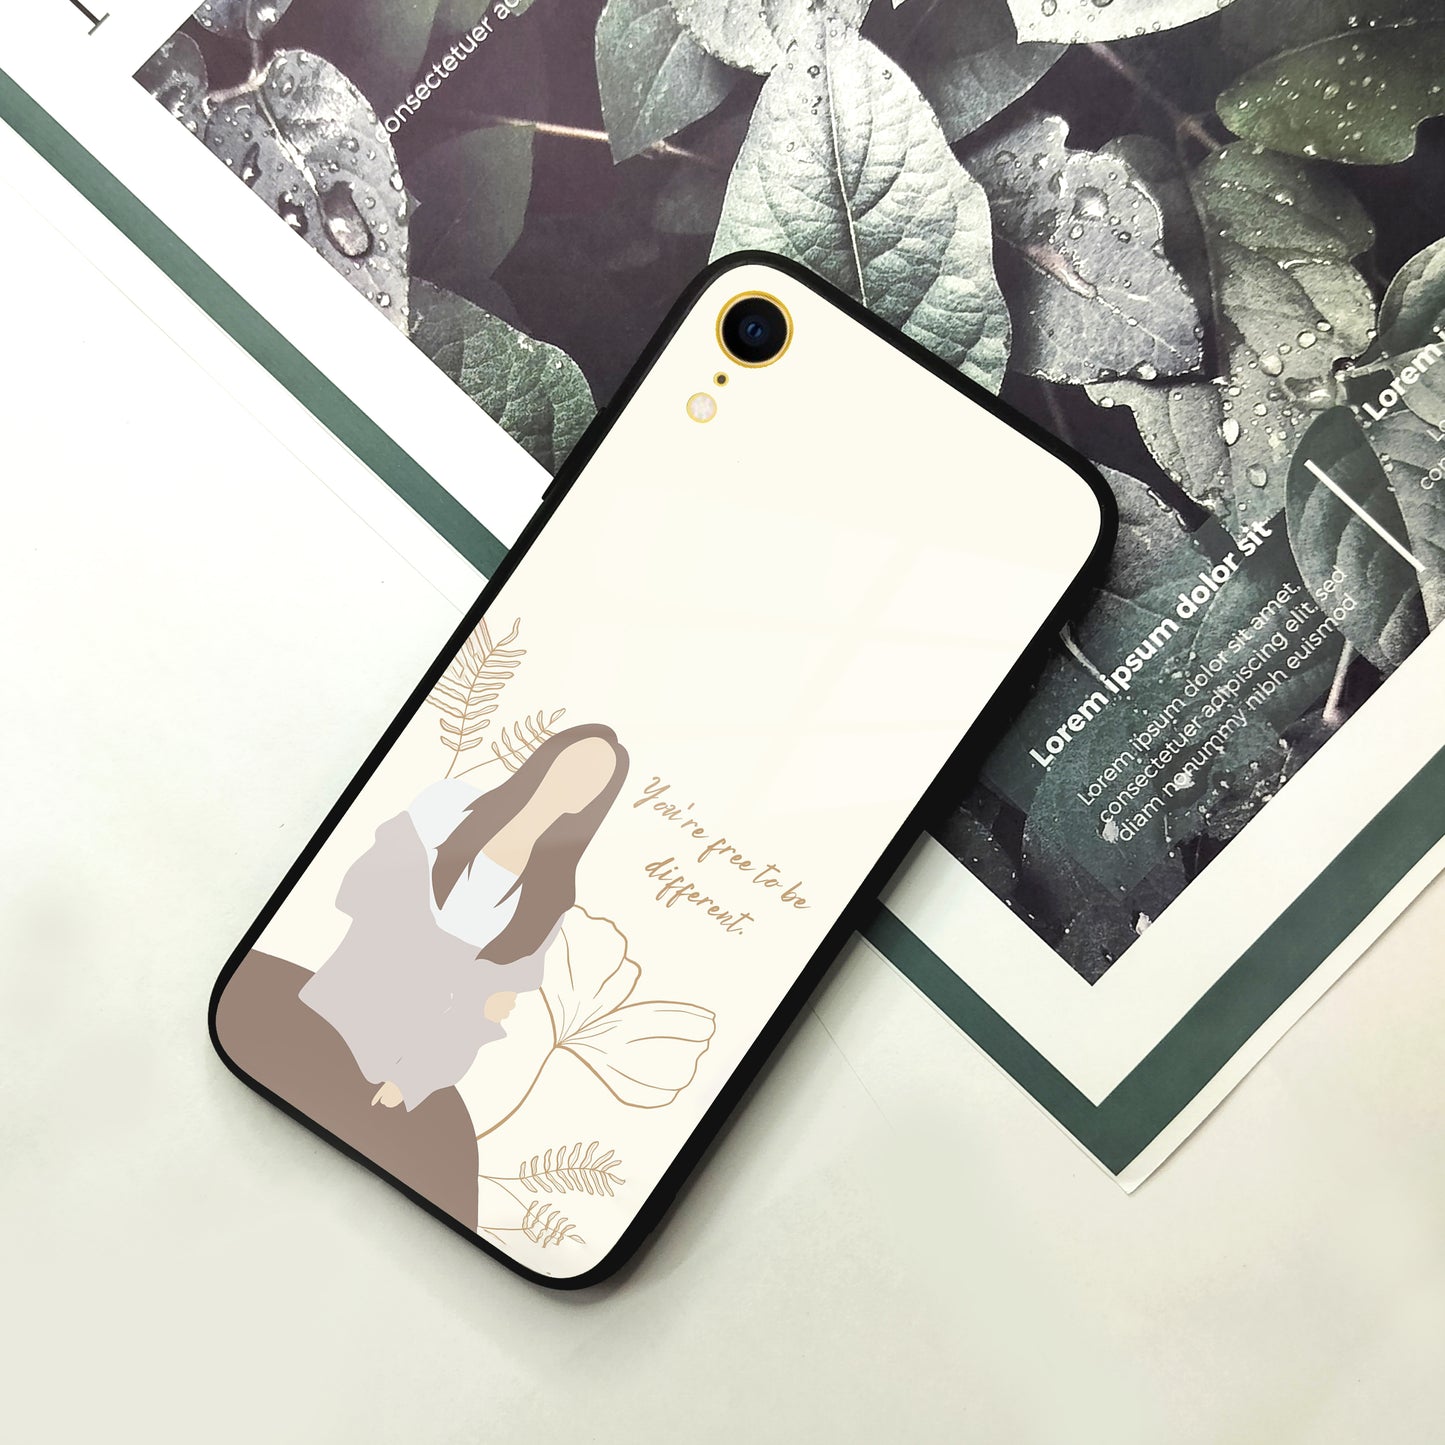 Always Stay Humble And Kind Glass Phone Cover-V2 for iPhone